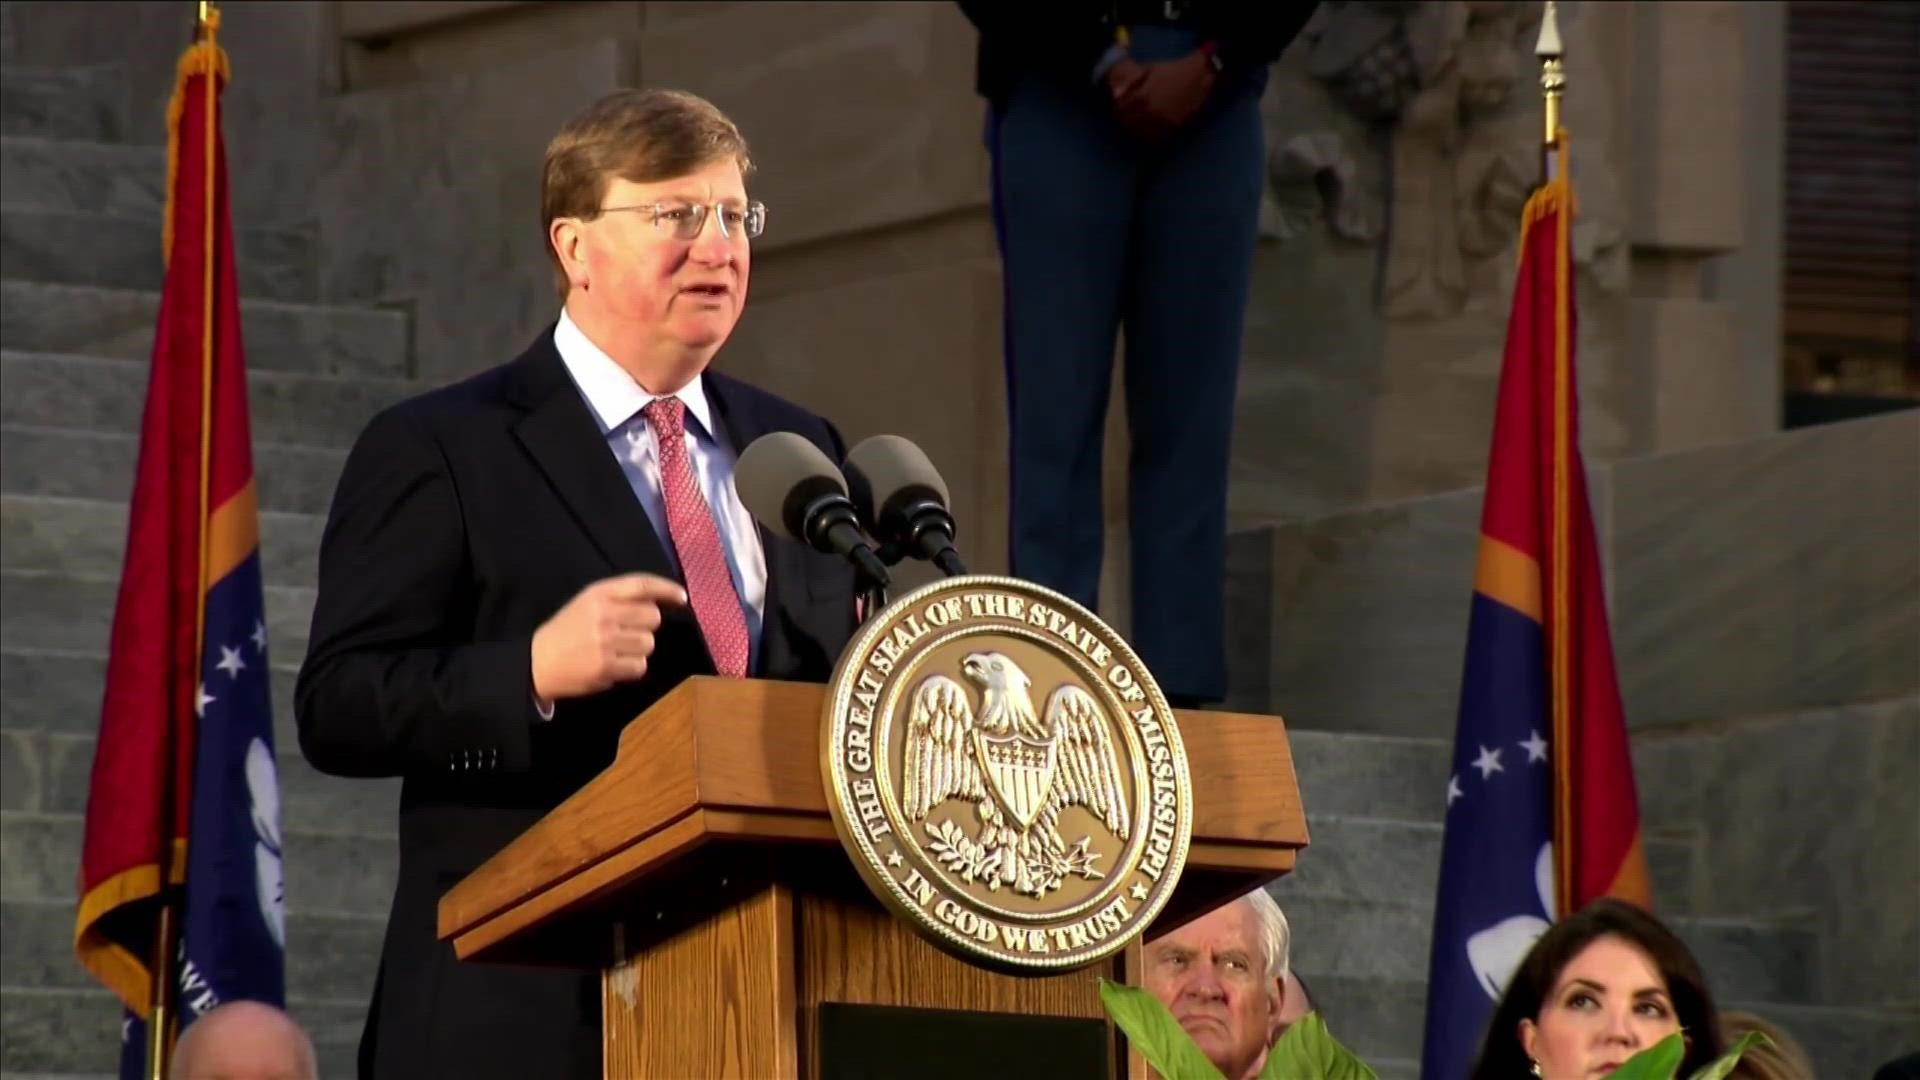 Mississippi Republican Governor Tate Reeves said Sunday he wants the state to allow a full year of Medicaid coverage to women after they give birth.